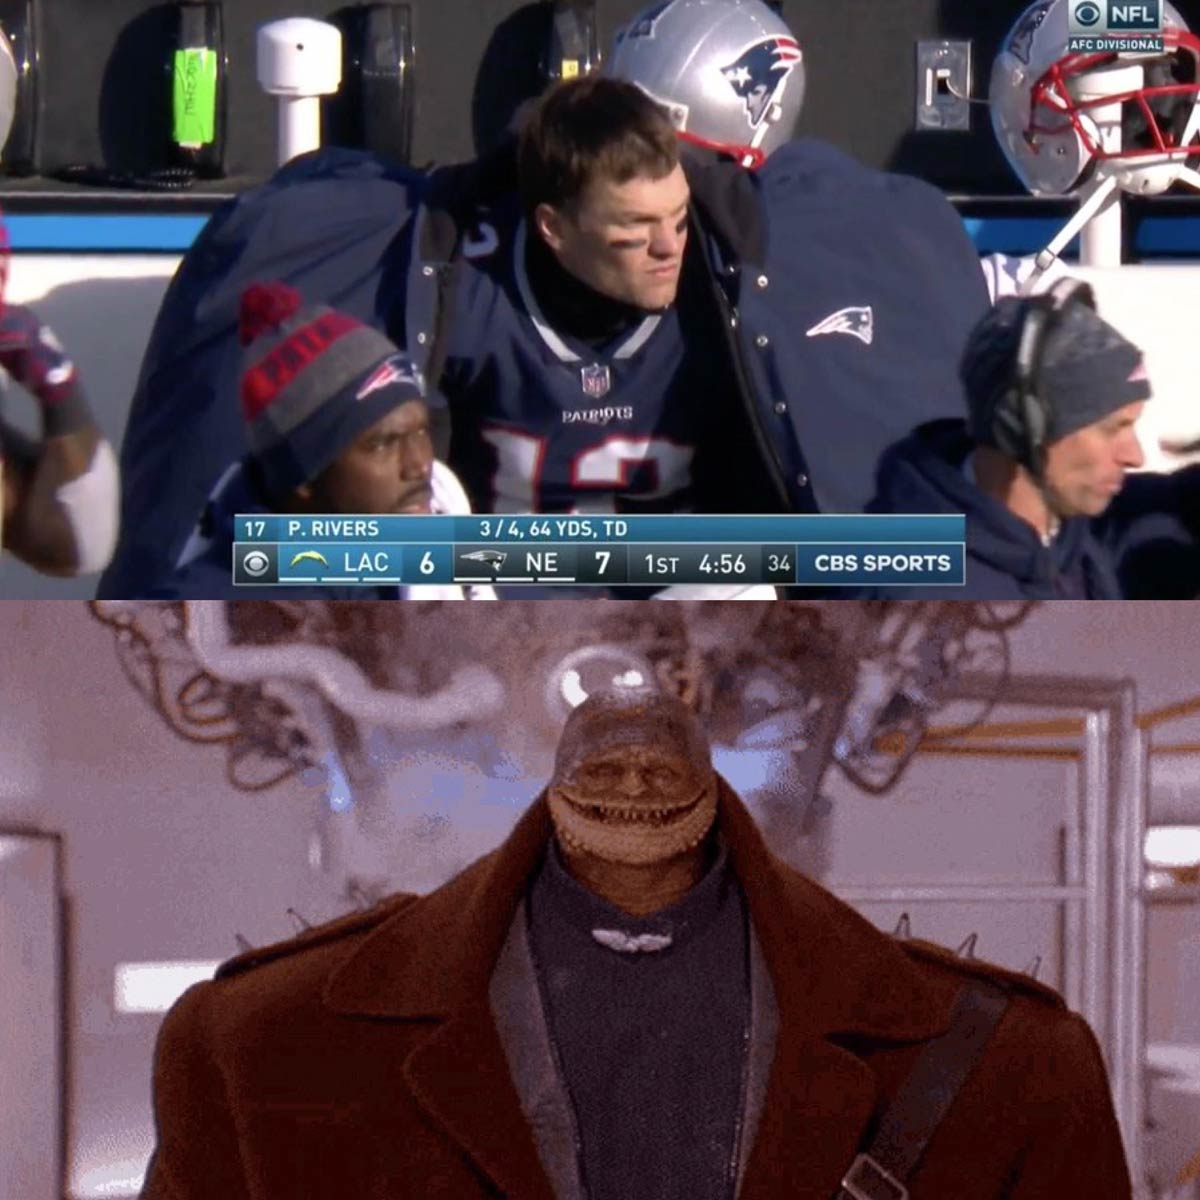 What I see when NFL players wear those coats